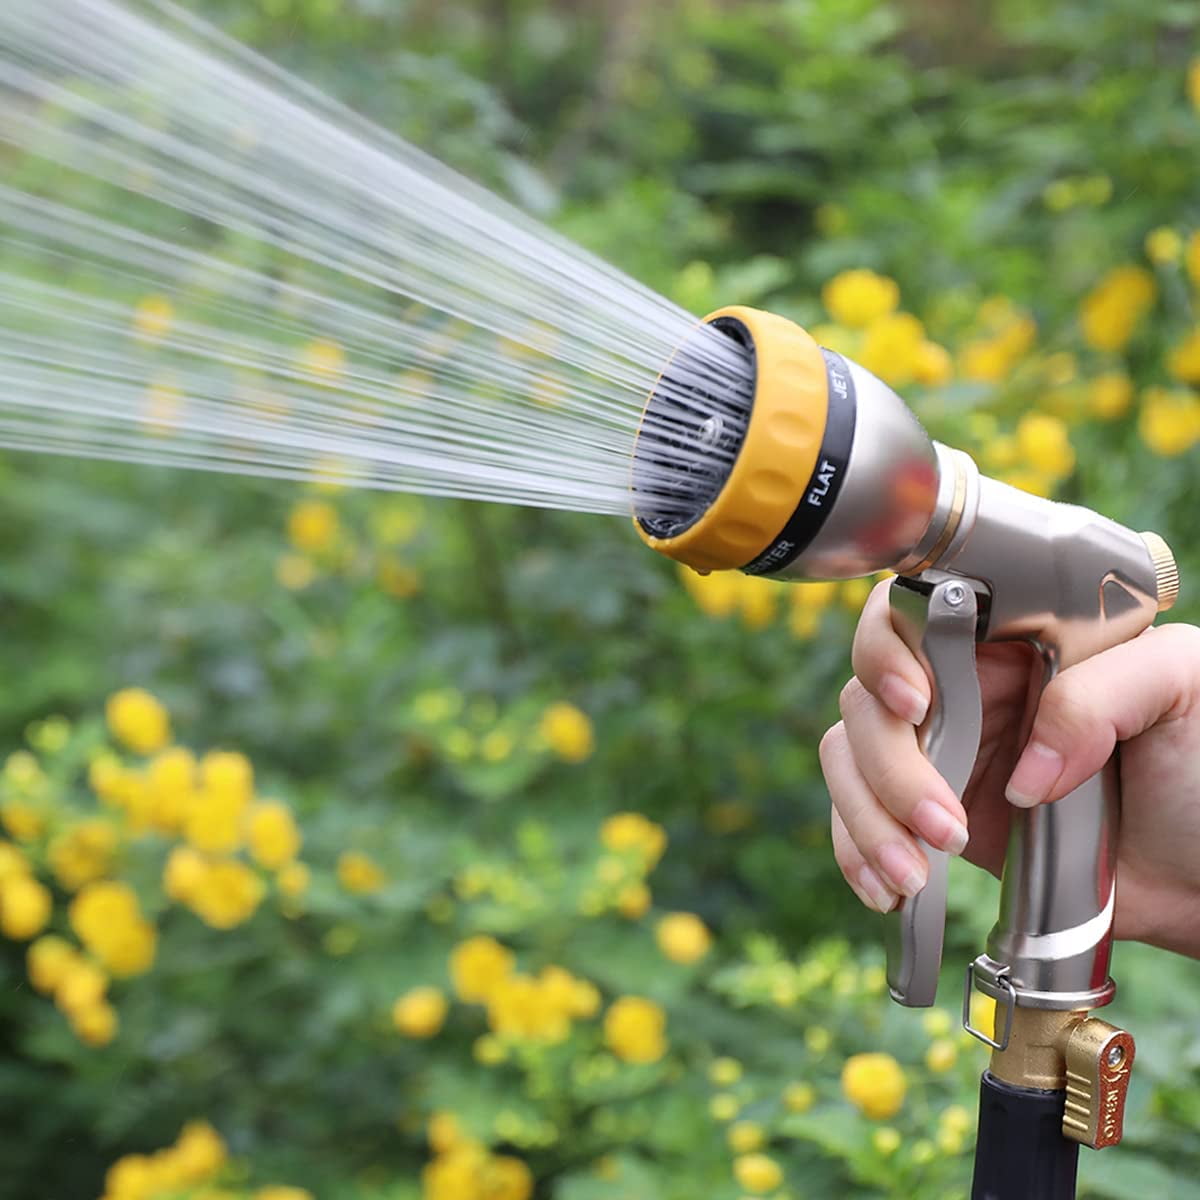 100% Heavy Duty Metal Water Sprayer with 7 Adjustable Spray Patterns Car Washing Cleaning and Showering Pets Garden Hose Nozzle High Pressure Nozzle Sprayer for Hand Watering Garden